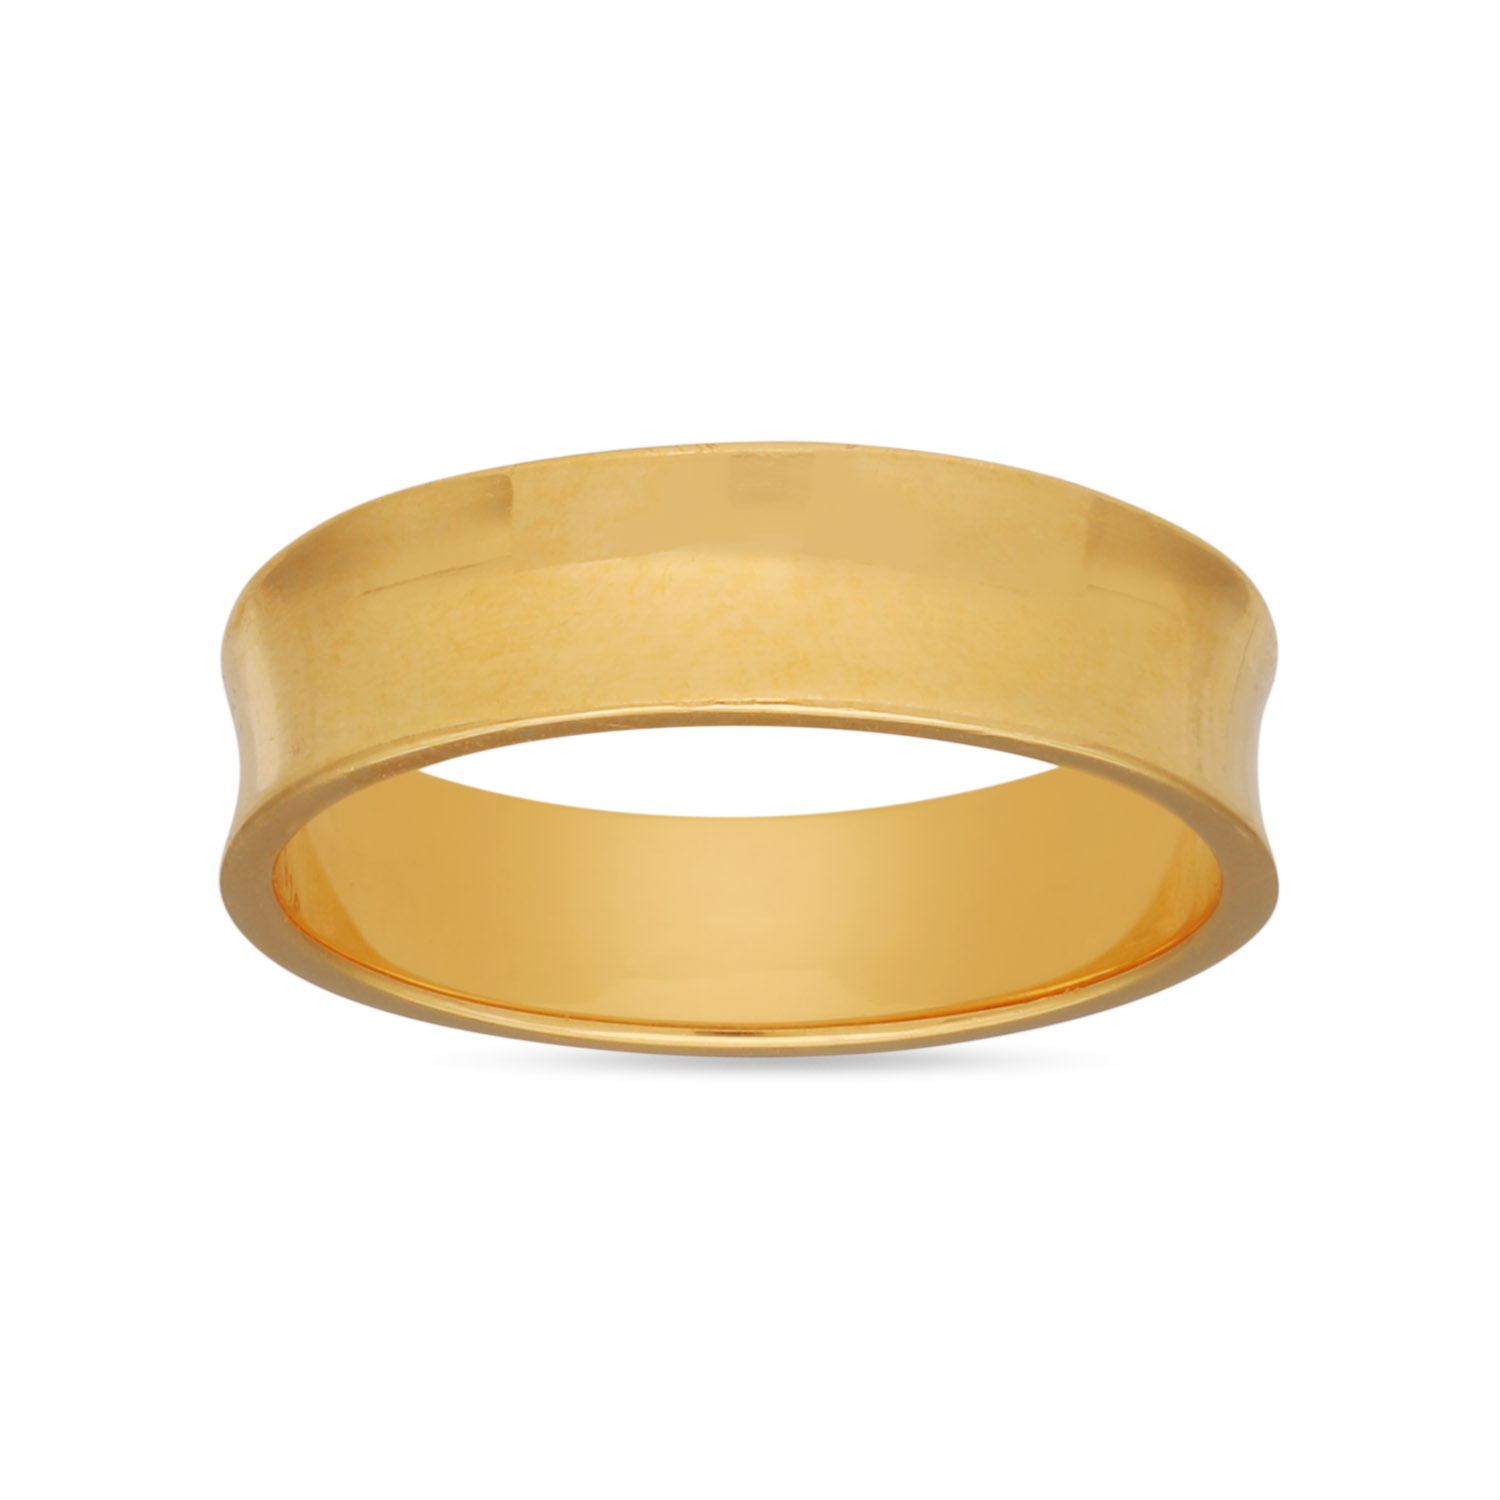 rig aabi jewels bis hallmark 22 karat gold ring for man and wom